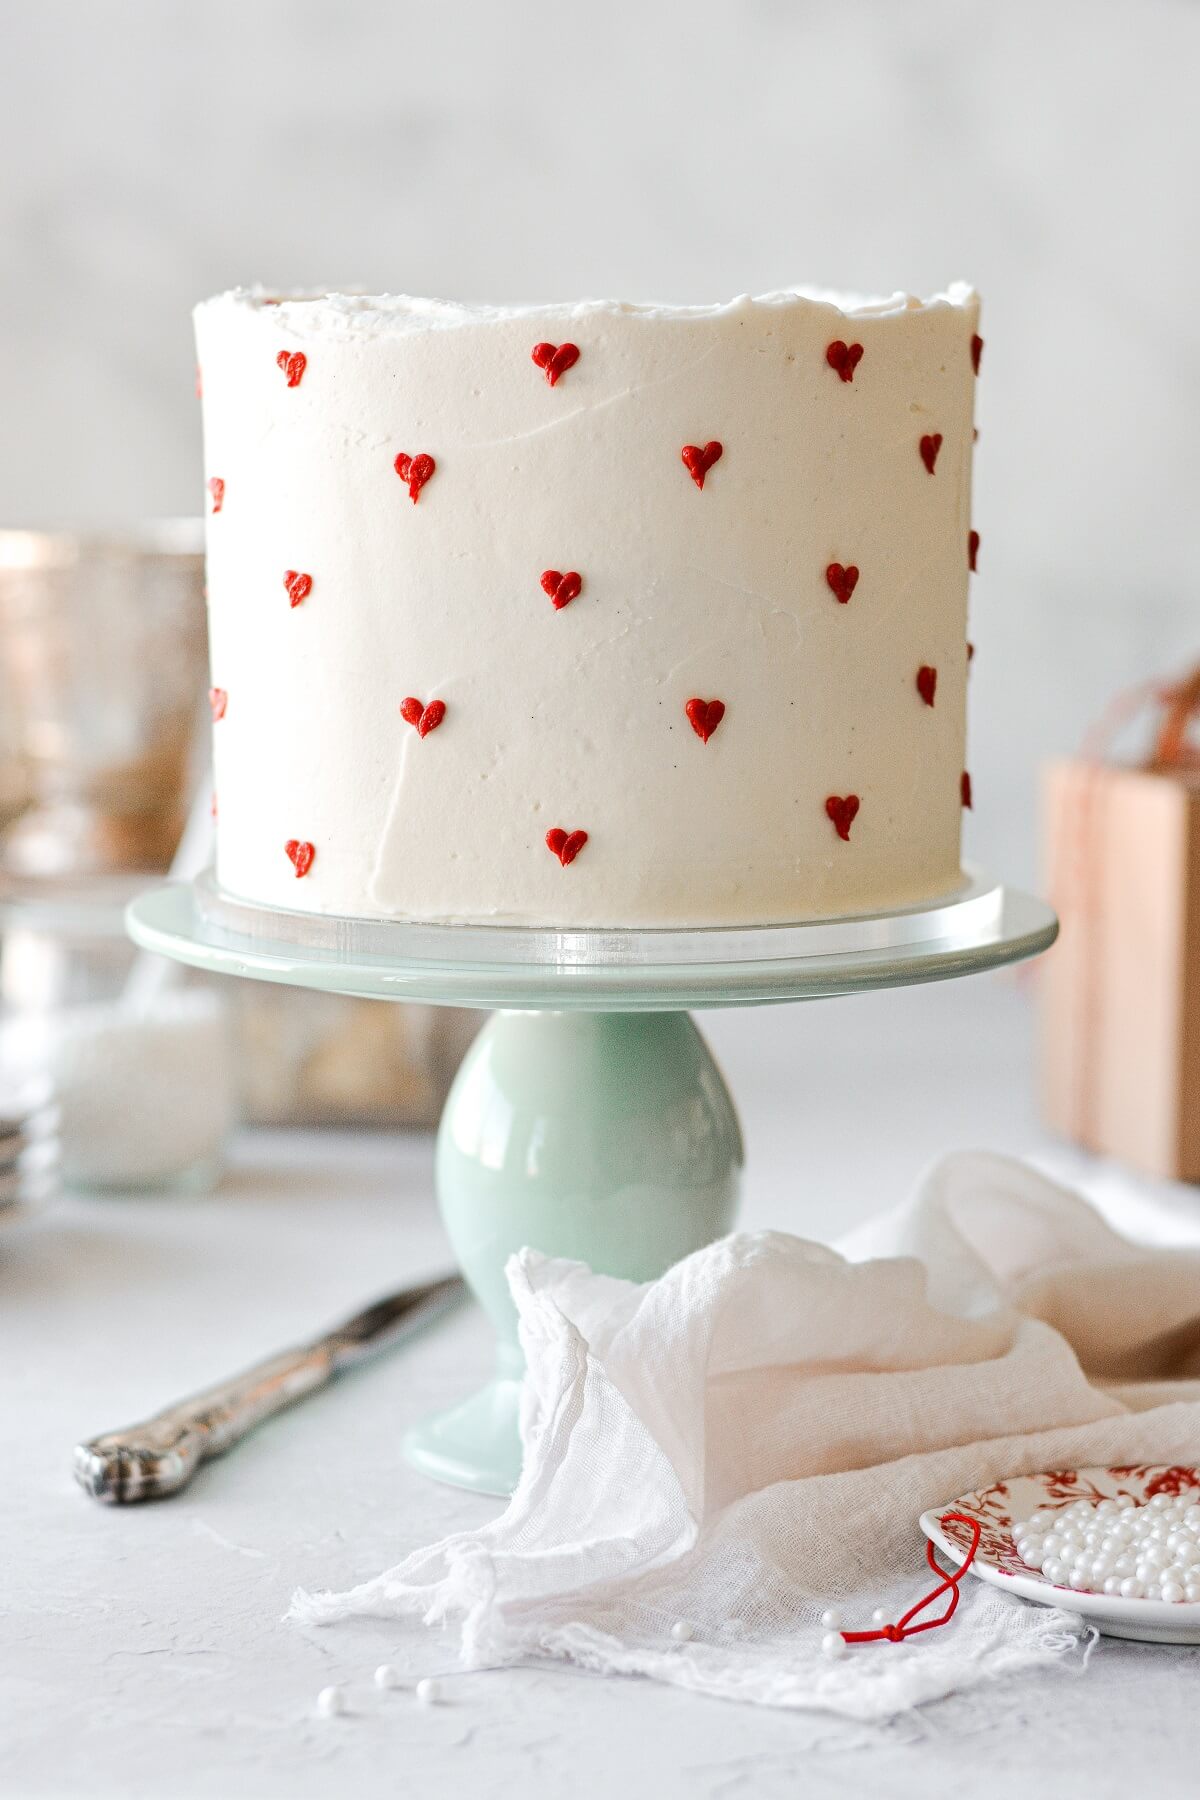 A Valentine's cake with red hearts piped onto white buttercream.